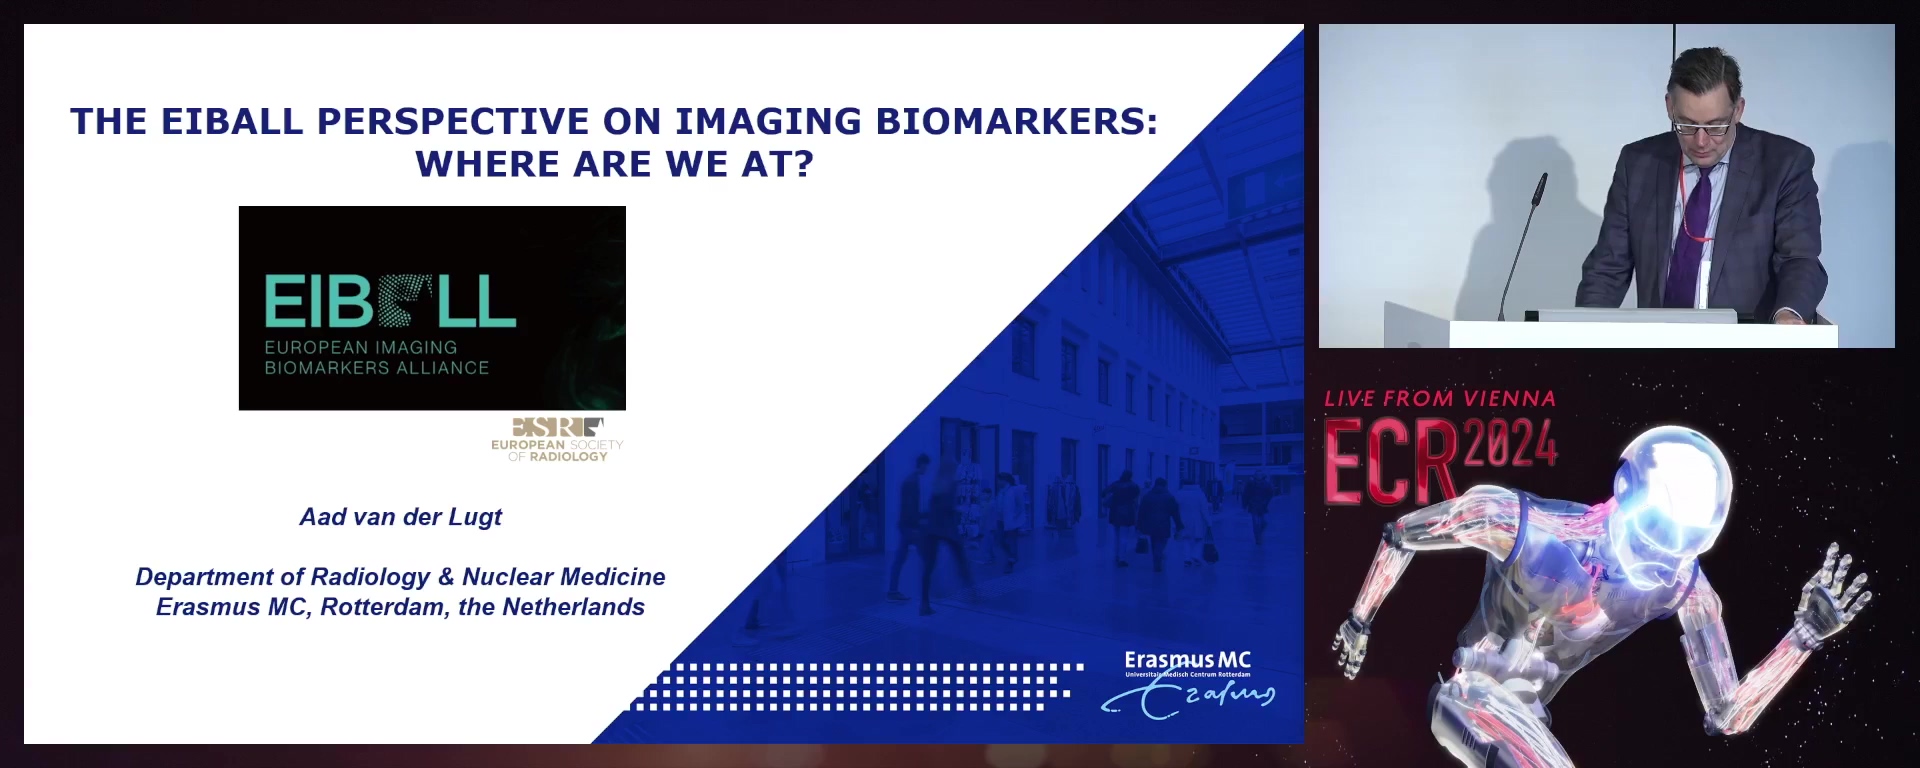 The EIBALL perspective on imaging biomarkers: where are we at?